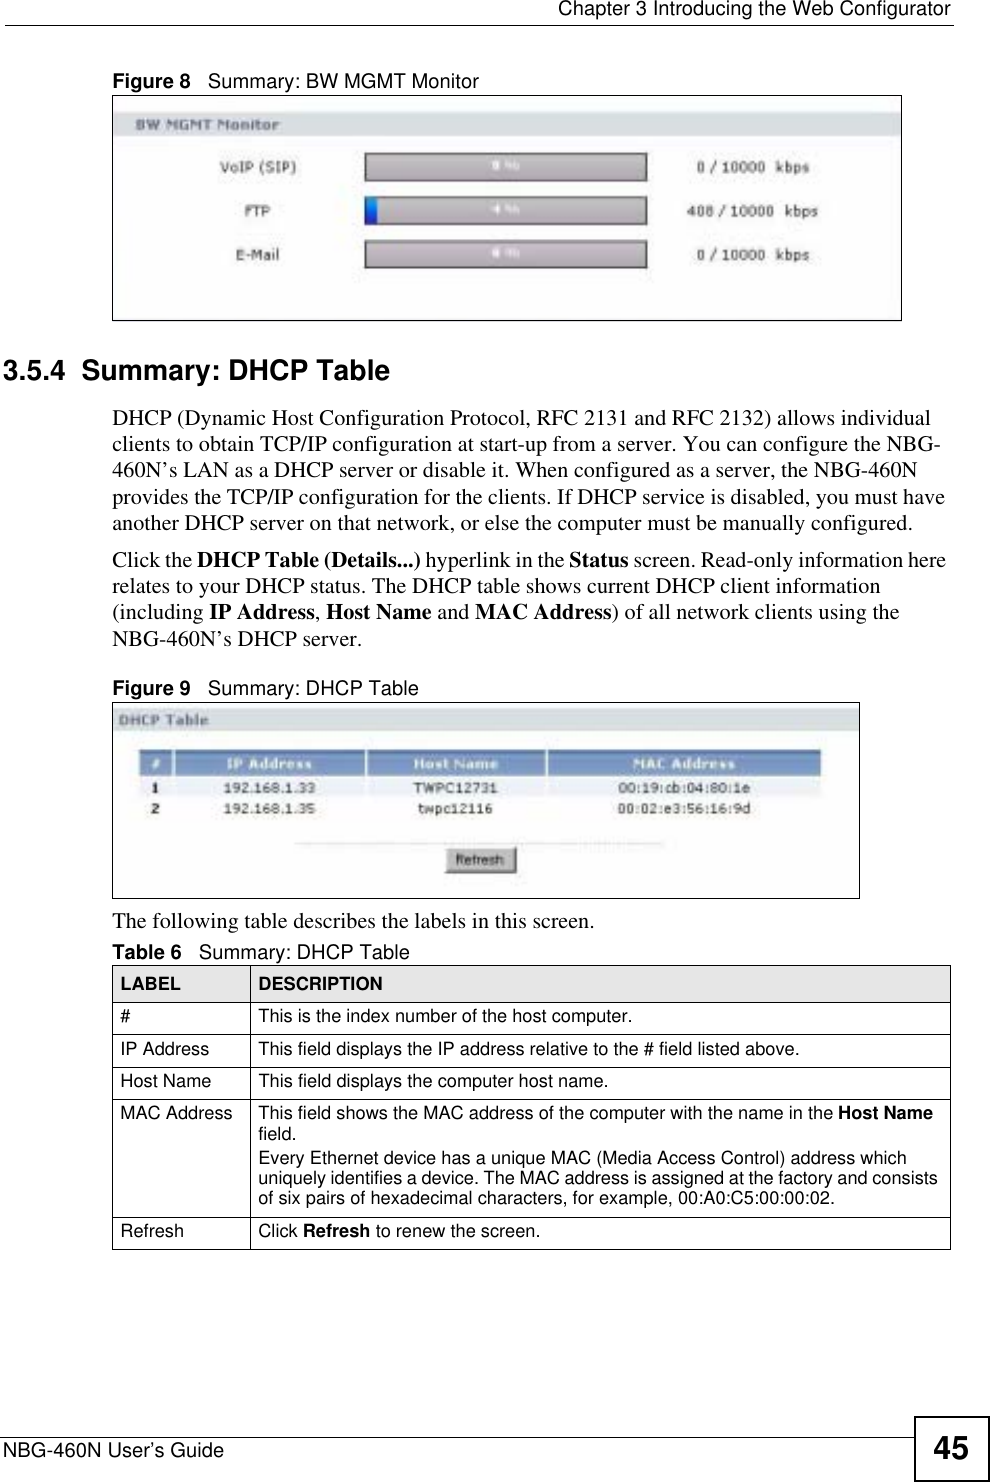  Chapter 3 Introducing the Web ConfiguratorNBG-460N User’s Guide 45Figure 8   Summary: BW MGMT Monitor3.5.4  Summary: DHCP TableDHCP (Dynamic Host Configuration Protocol, RFC 2131 and RFC 2132) allows individual clients to obtain TCP/IP configuration at start-up from a server. You can configure the NBG-460N’s LAN as a DHCP server or disable it. When configured as a server, the NBG-460N provides the TCP/IP configuration for the clients. If DHCP service is disabled, you must have another DHCP server on that network, or else the computer must be manually configured.Click the DHCP Table (Details...) hyperlink in the Status screen. Read-only information here relates to your DHCP status. The DHCP table shows current DHCP client information (including IP Address,Host Name and MAC Address) of all network clients using the NBG-460N’s DHCP server.Figure 9   Summary: DHCP TableThe following table describes the labels in this screen.Table 6   Summary: DHCP TableLABEL DESCRIPTION#  This is the index number of the host computer.IP Address This field displays the IP address relative to the # field listed above.Host Name  This field displays the computer host name.MAC Address This field shows the MAC address of the computer with the name in the Host Name field.Every Ethernet device has a unique MAC (Media Access Control) address which uniquely identifies a device. The MAC address is assigned at the factory and consists of six pairs of hexadecimal characters, for example, 00:A0:C5:00:00:02.Refresh Click Refresh to renew the screen. 